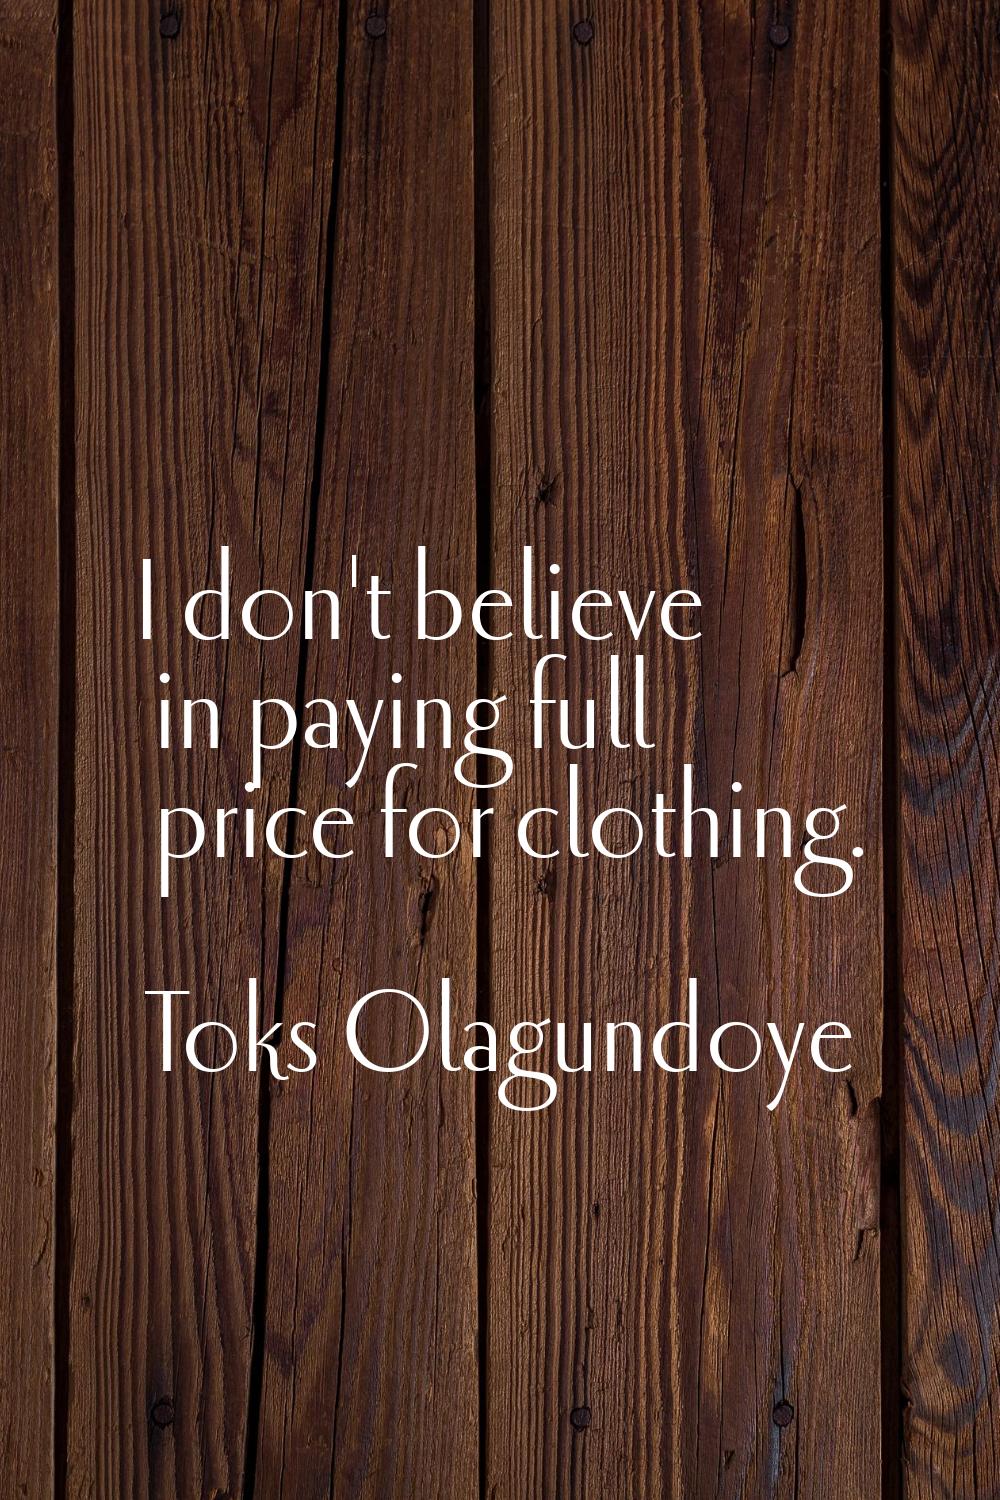 I don't believe in paying full price for clothing.